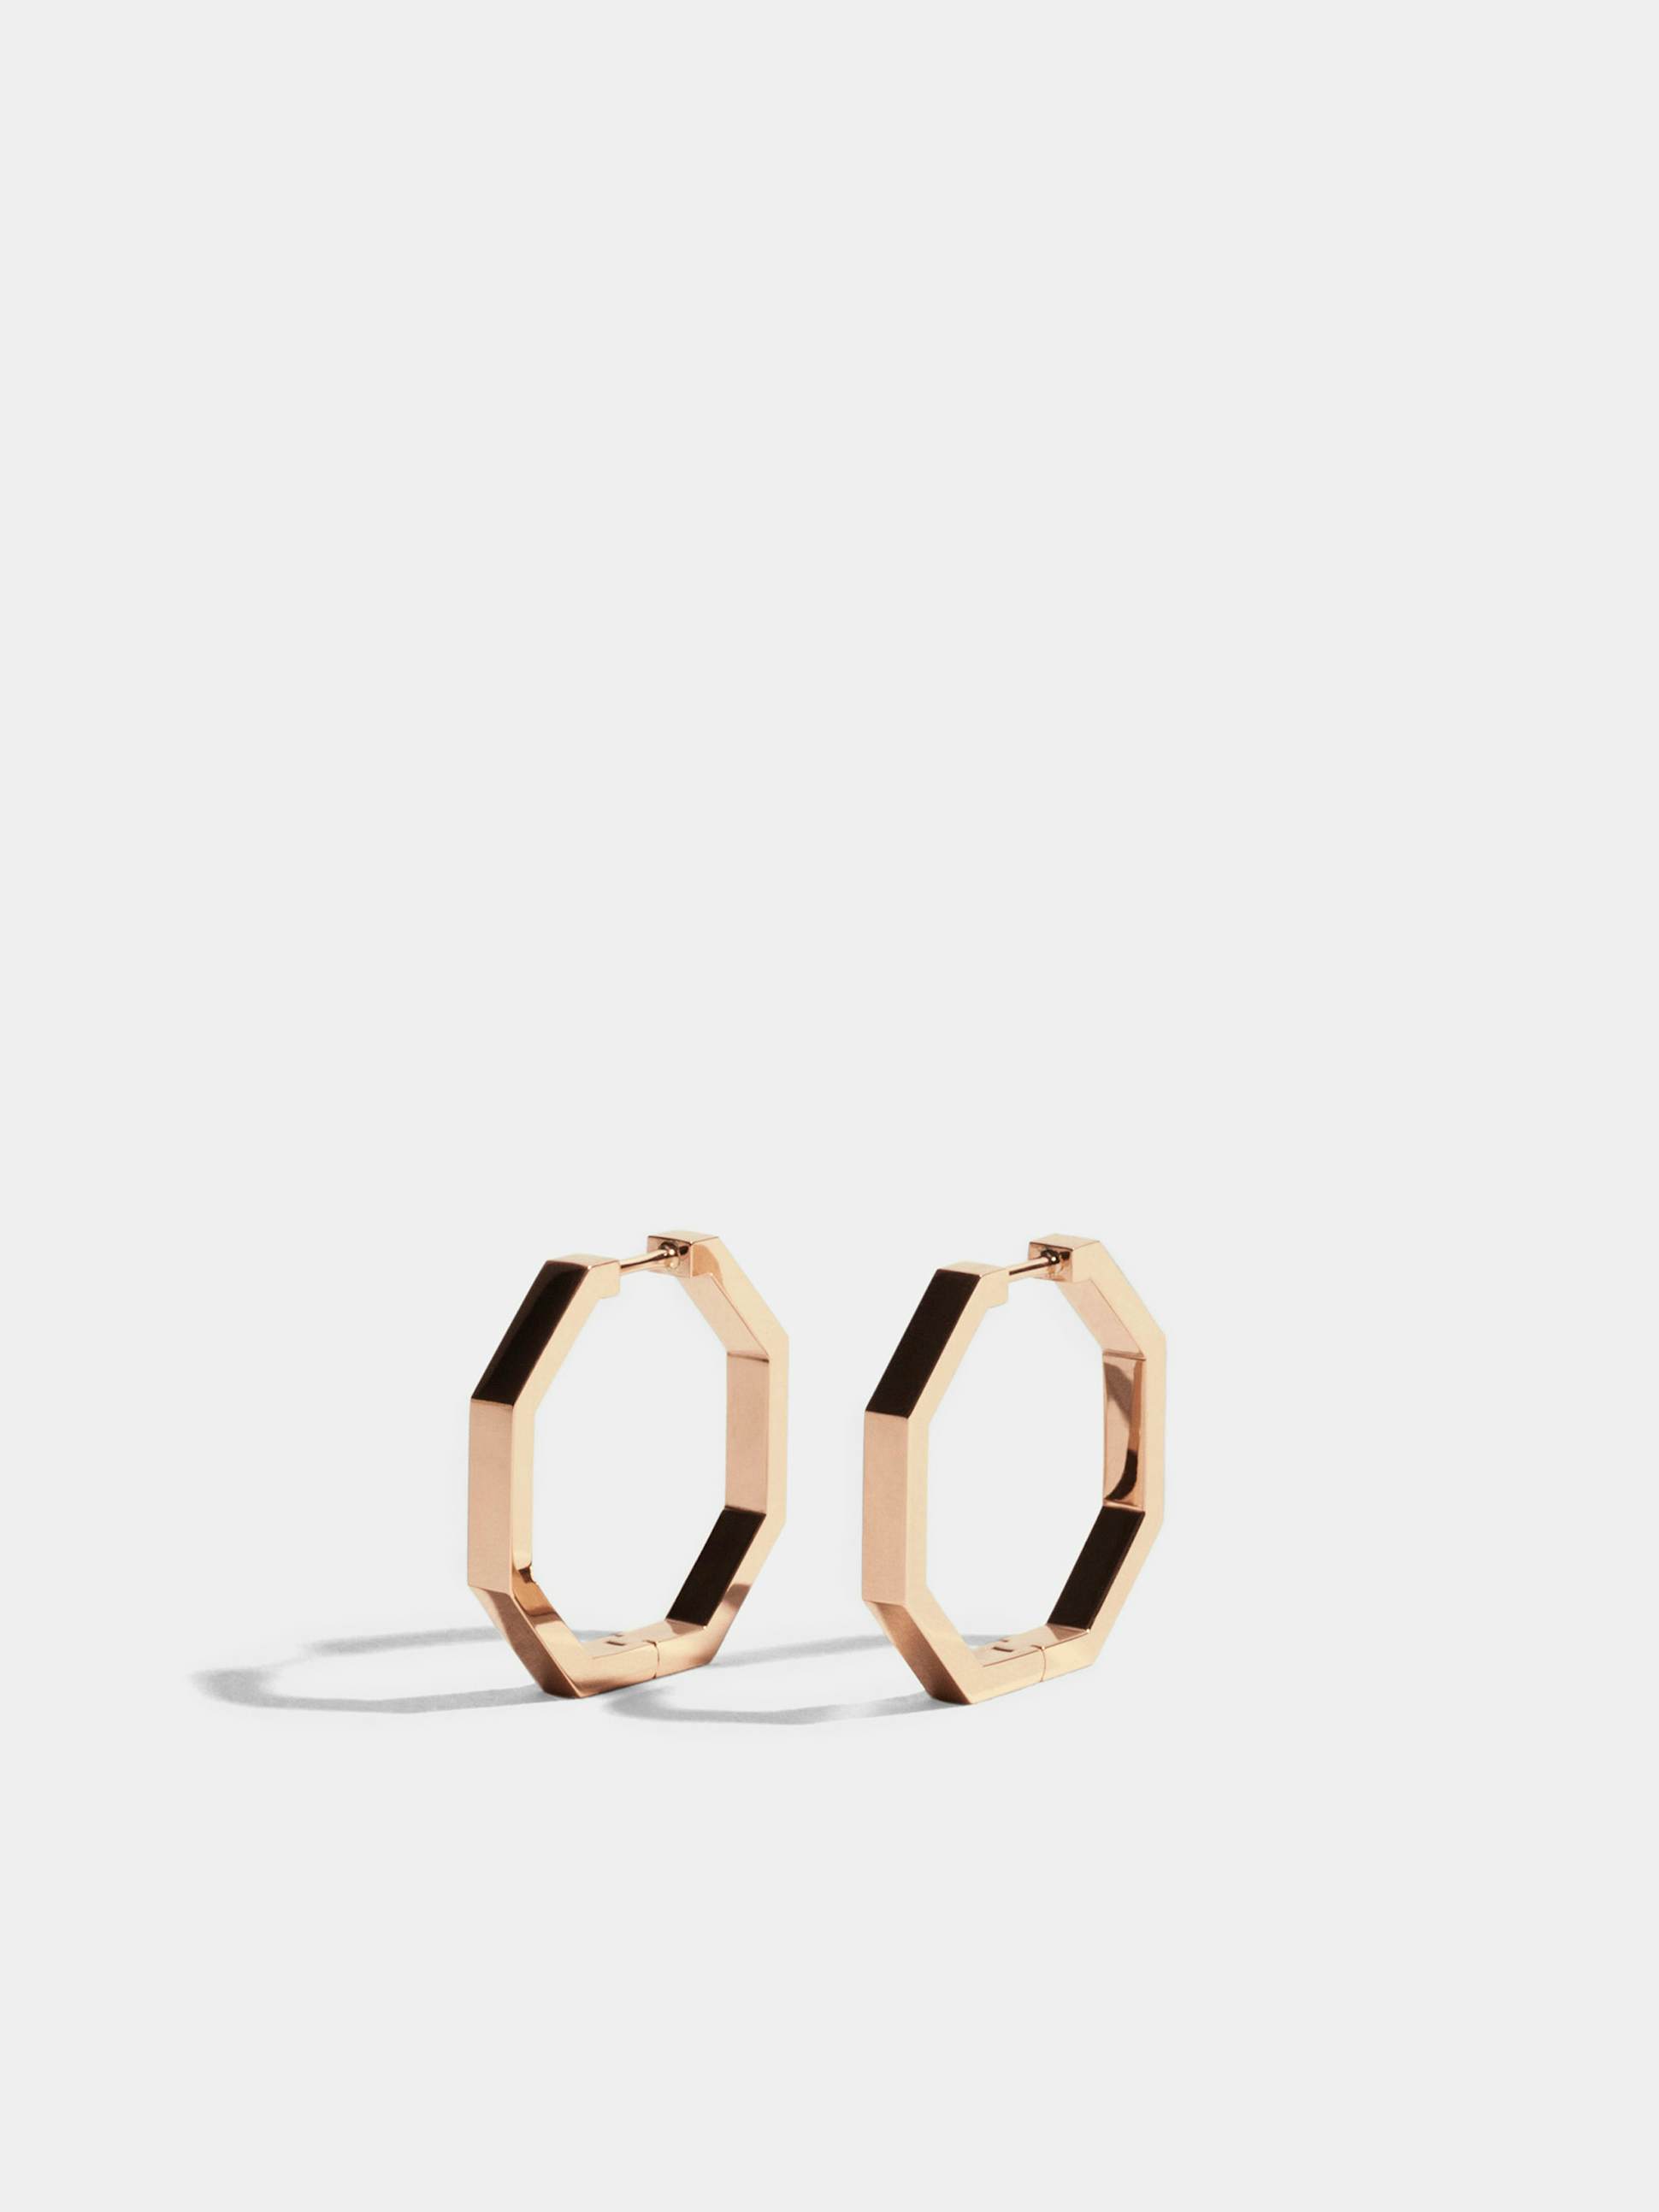 Octogone 18mm earrings in 18k Fairmined ethical rose gold, the pair.